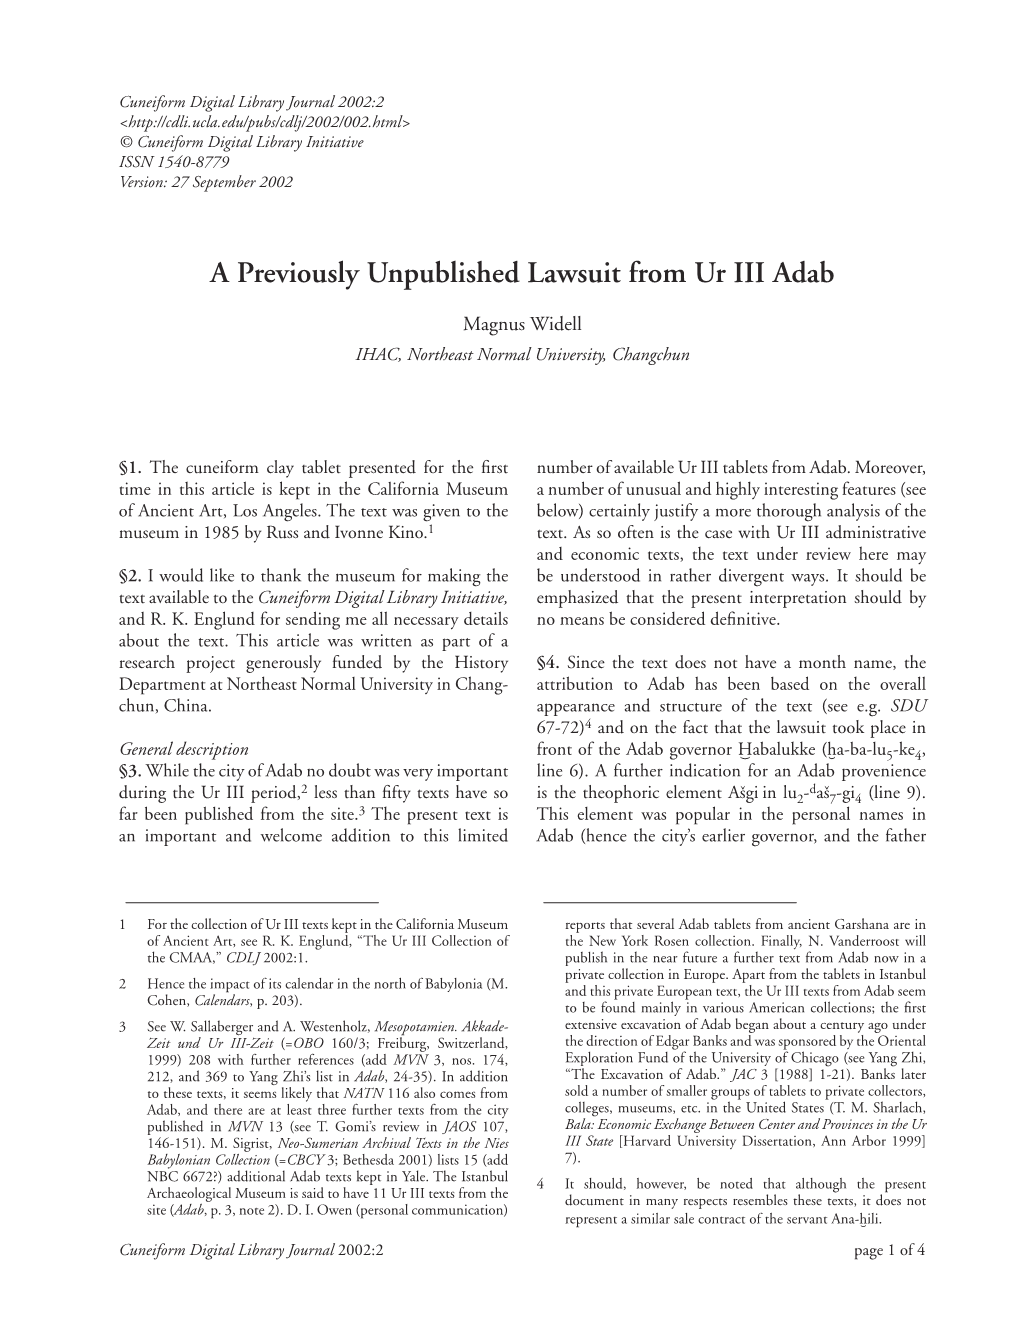 A Previously Unpublished Lawsuit from Ur III Adab